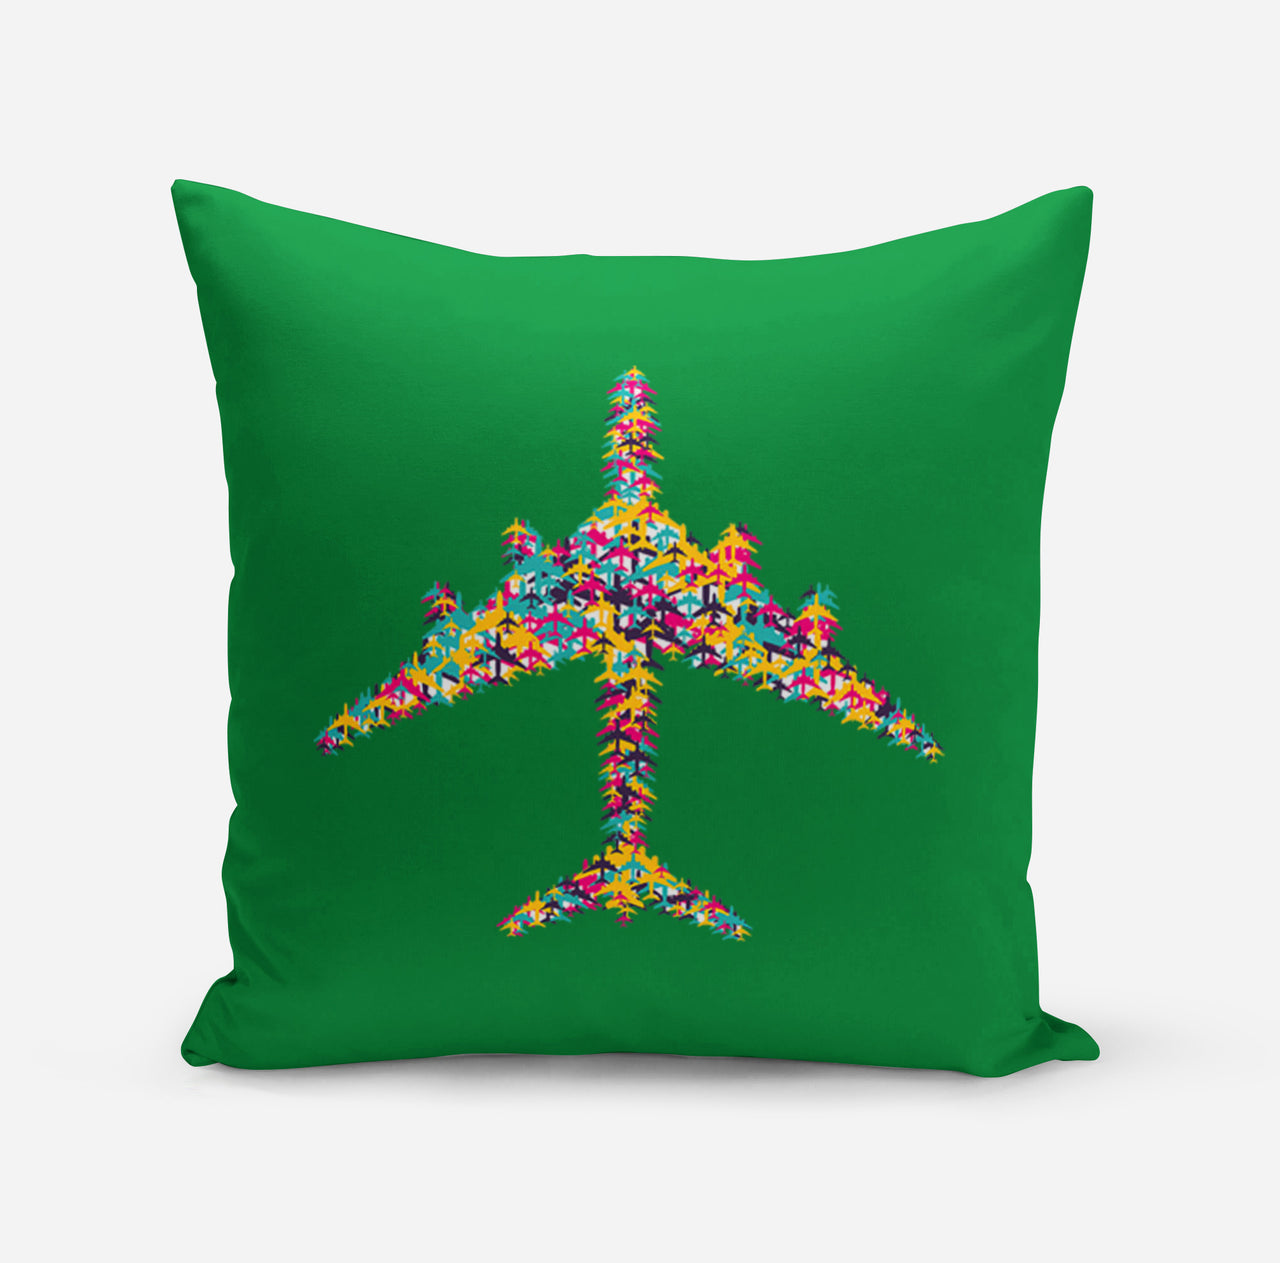 Colourful Airplane Designed Pillows